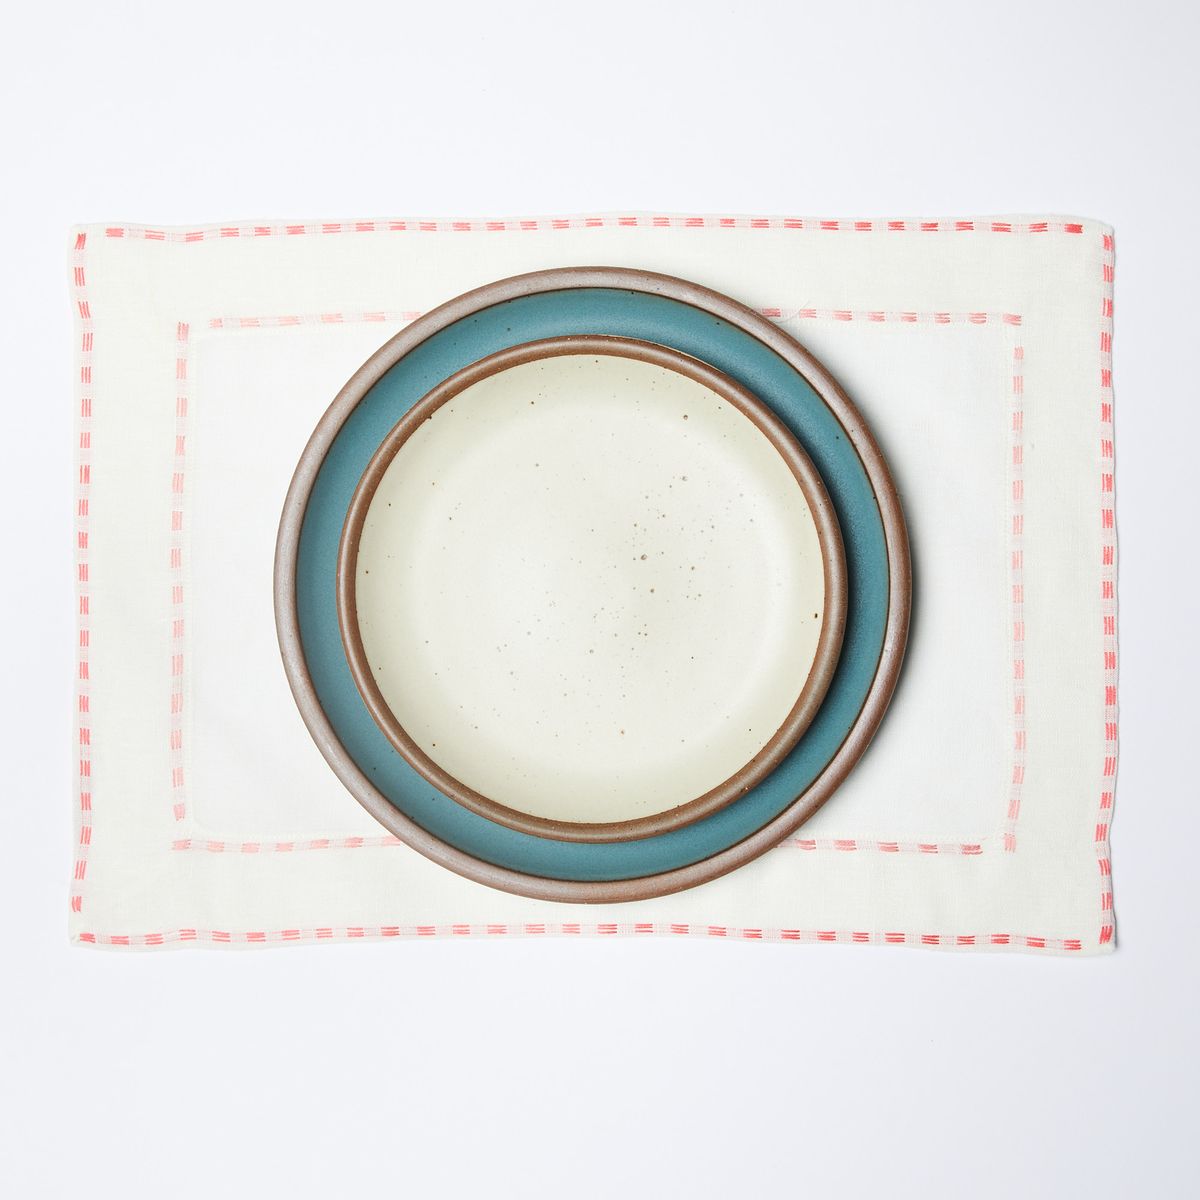 White placemat with coral border, blue and white stacked plates on top